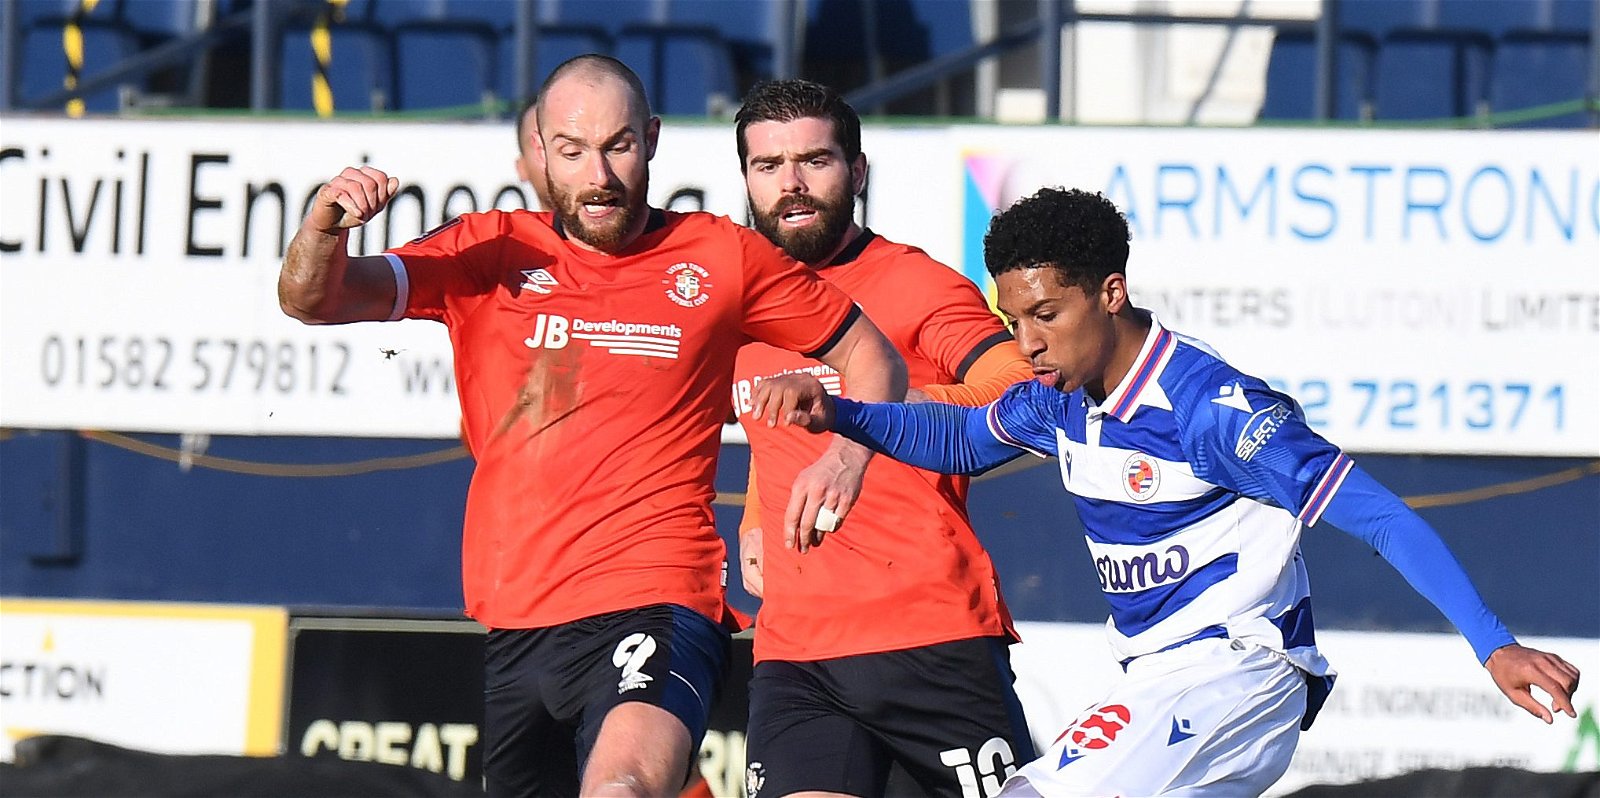 Bristol Rovers Luton Town, Bristol Rovers tried to sign Luton Town striker in January